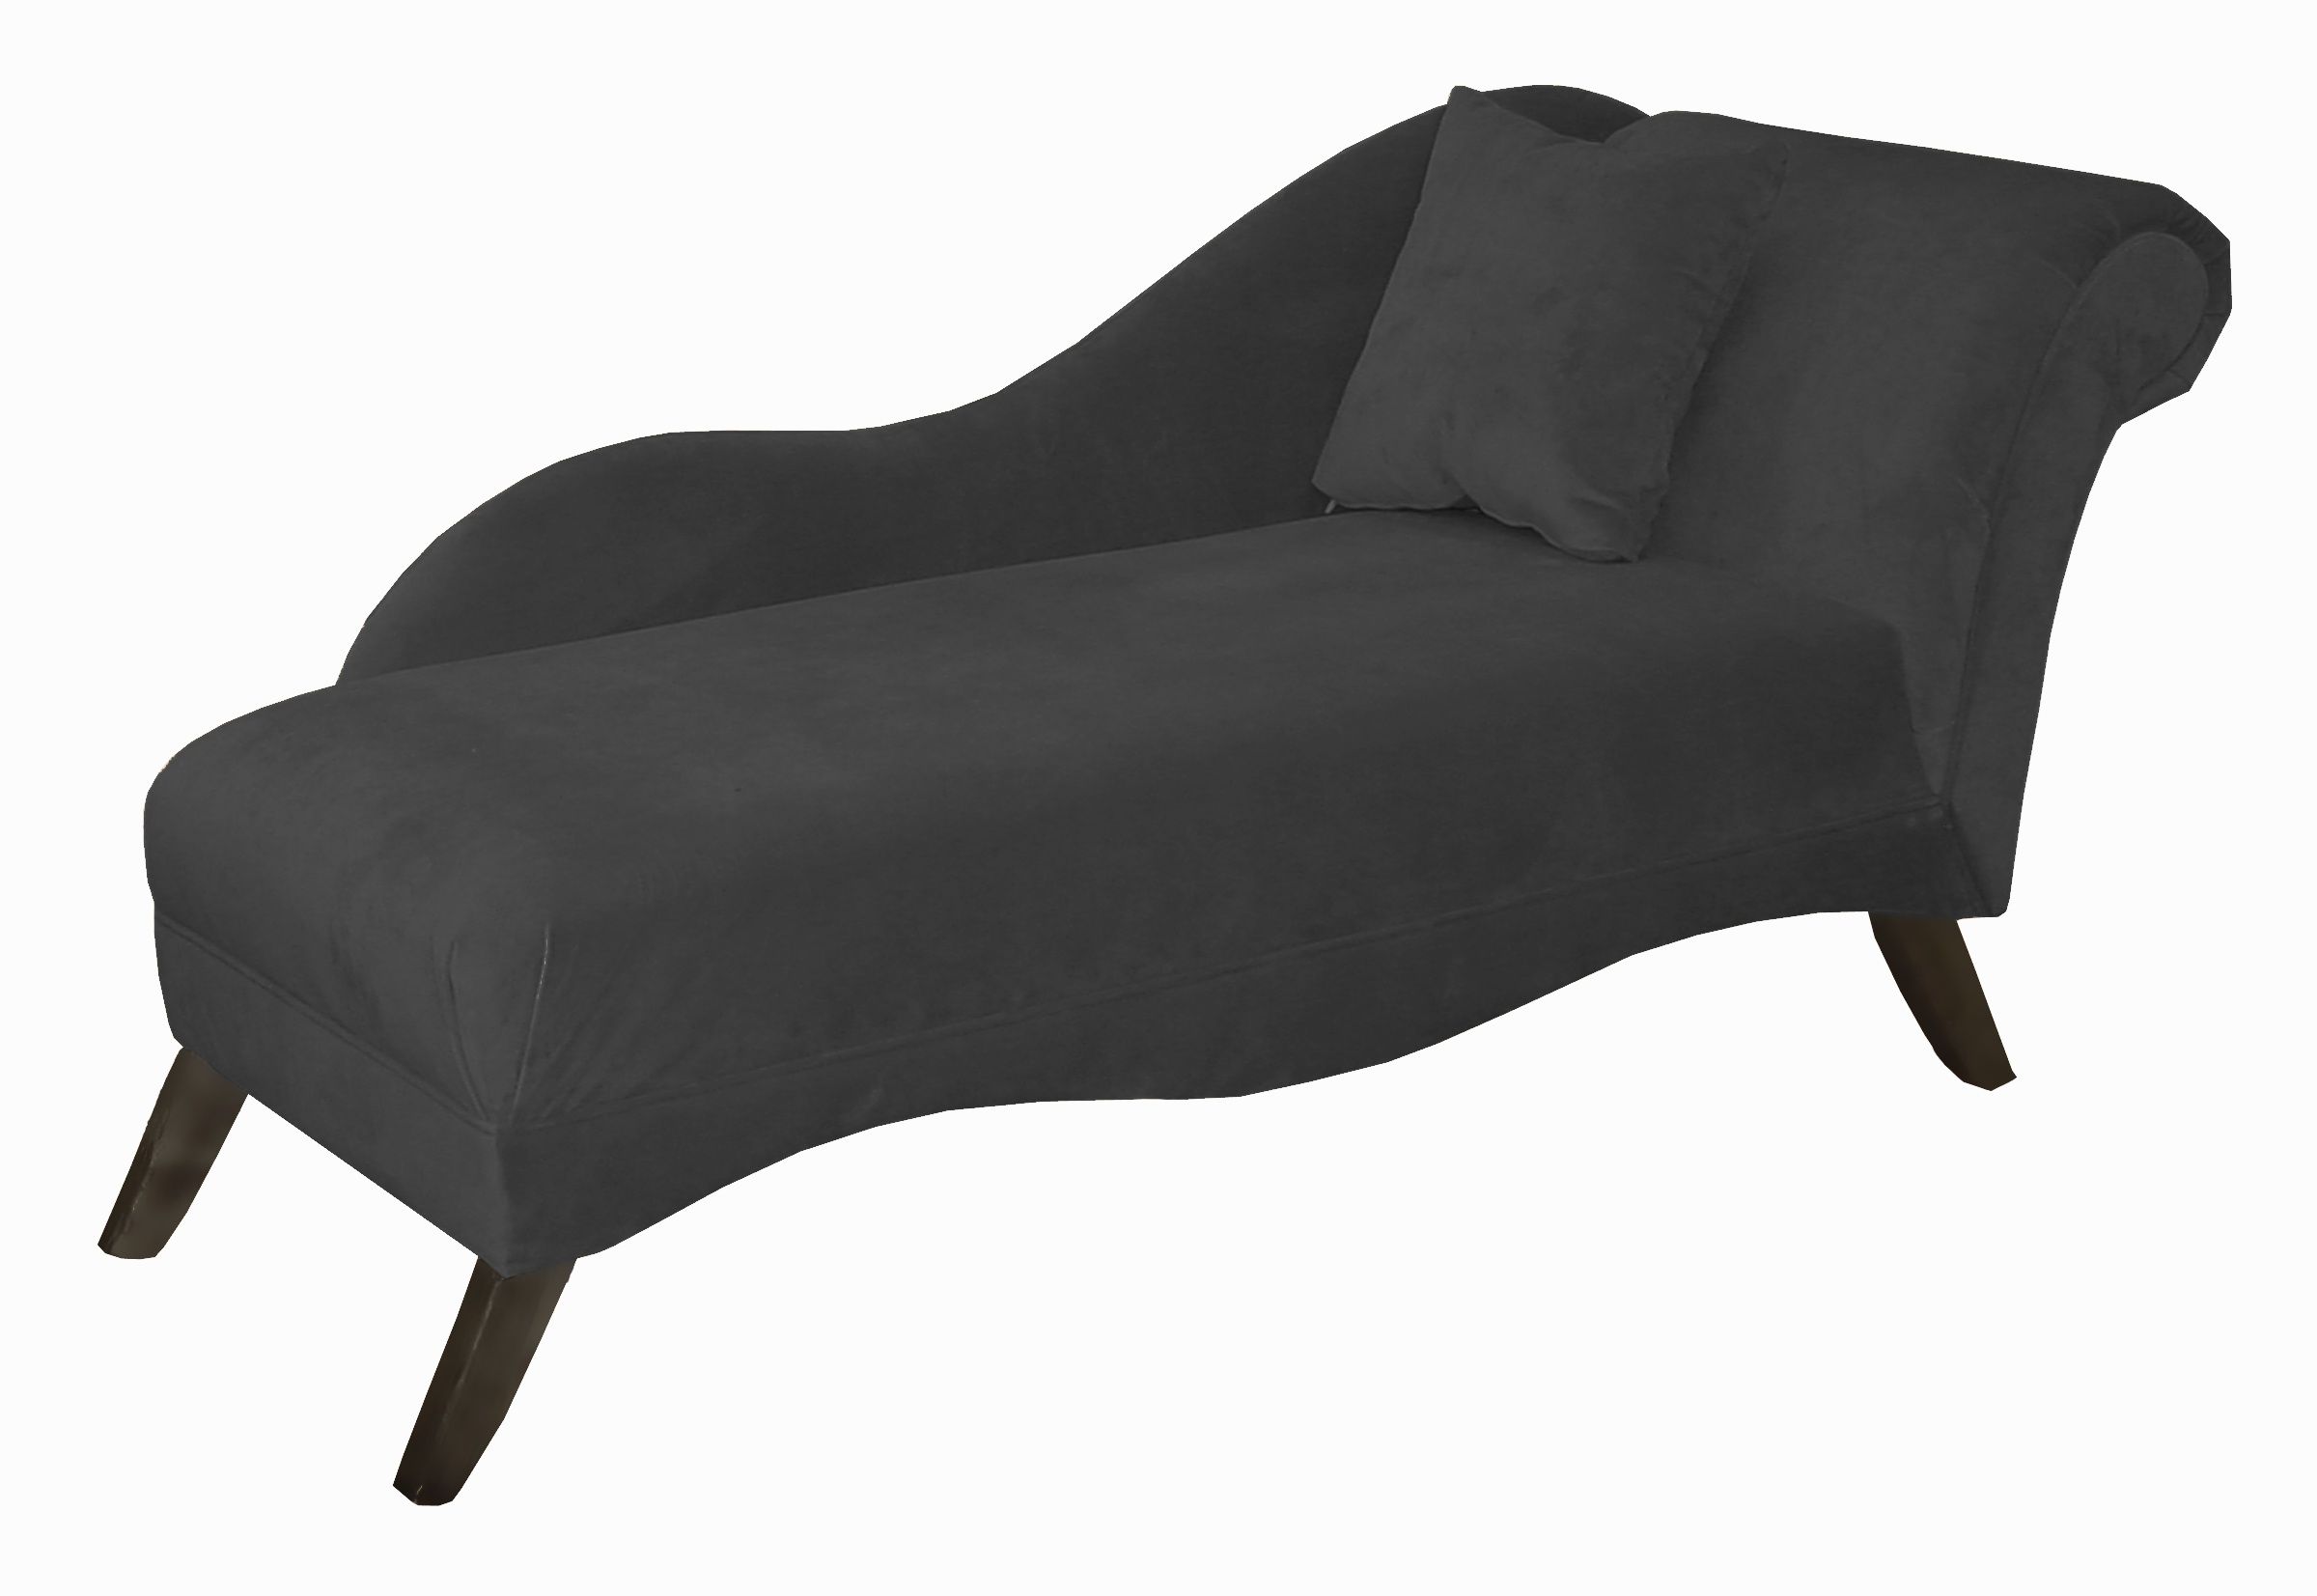 Black Indoors Chaise Lounge Chairs Throughout 2017 Bedroom (View 11 of 15)